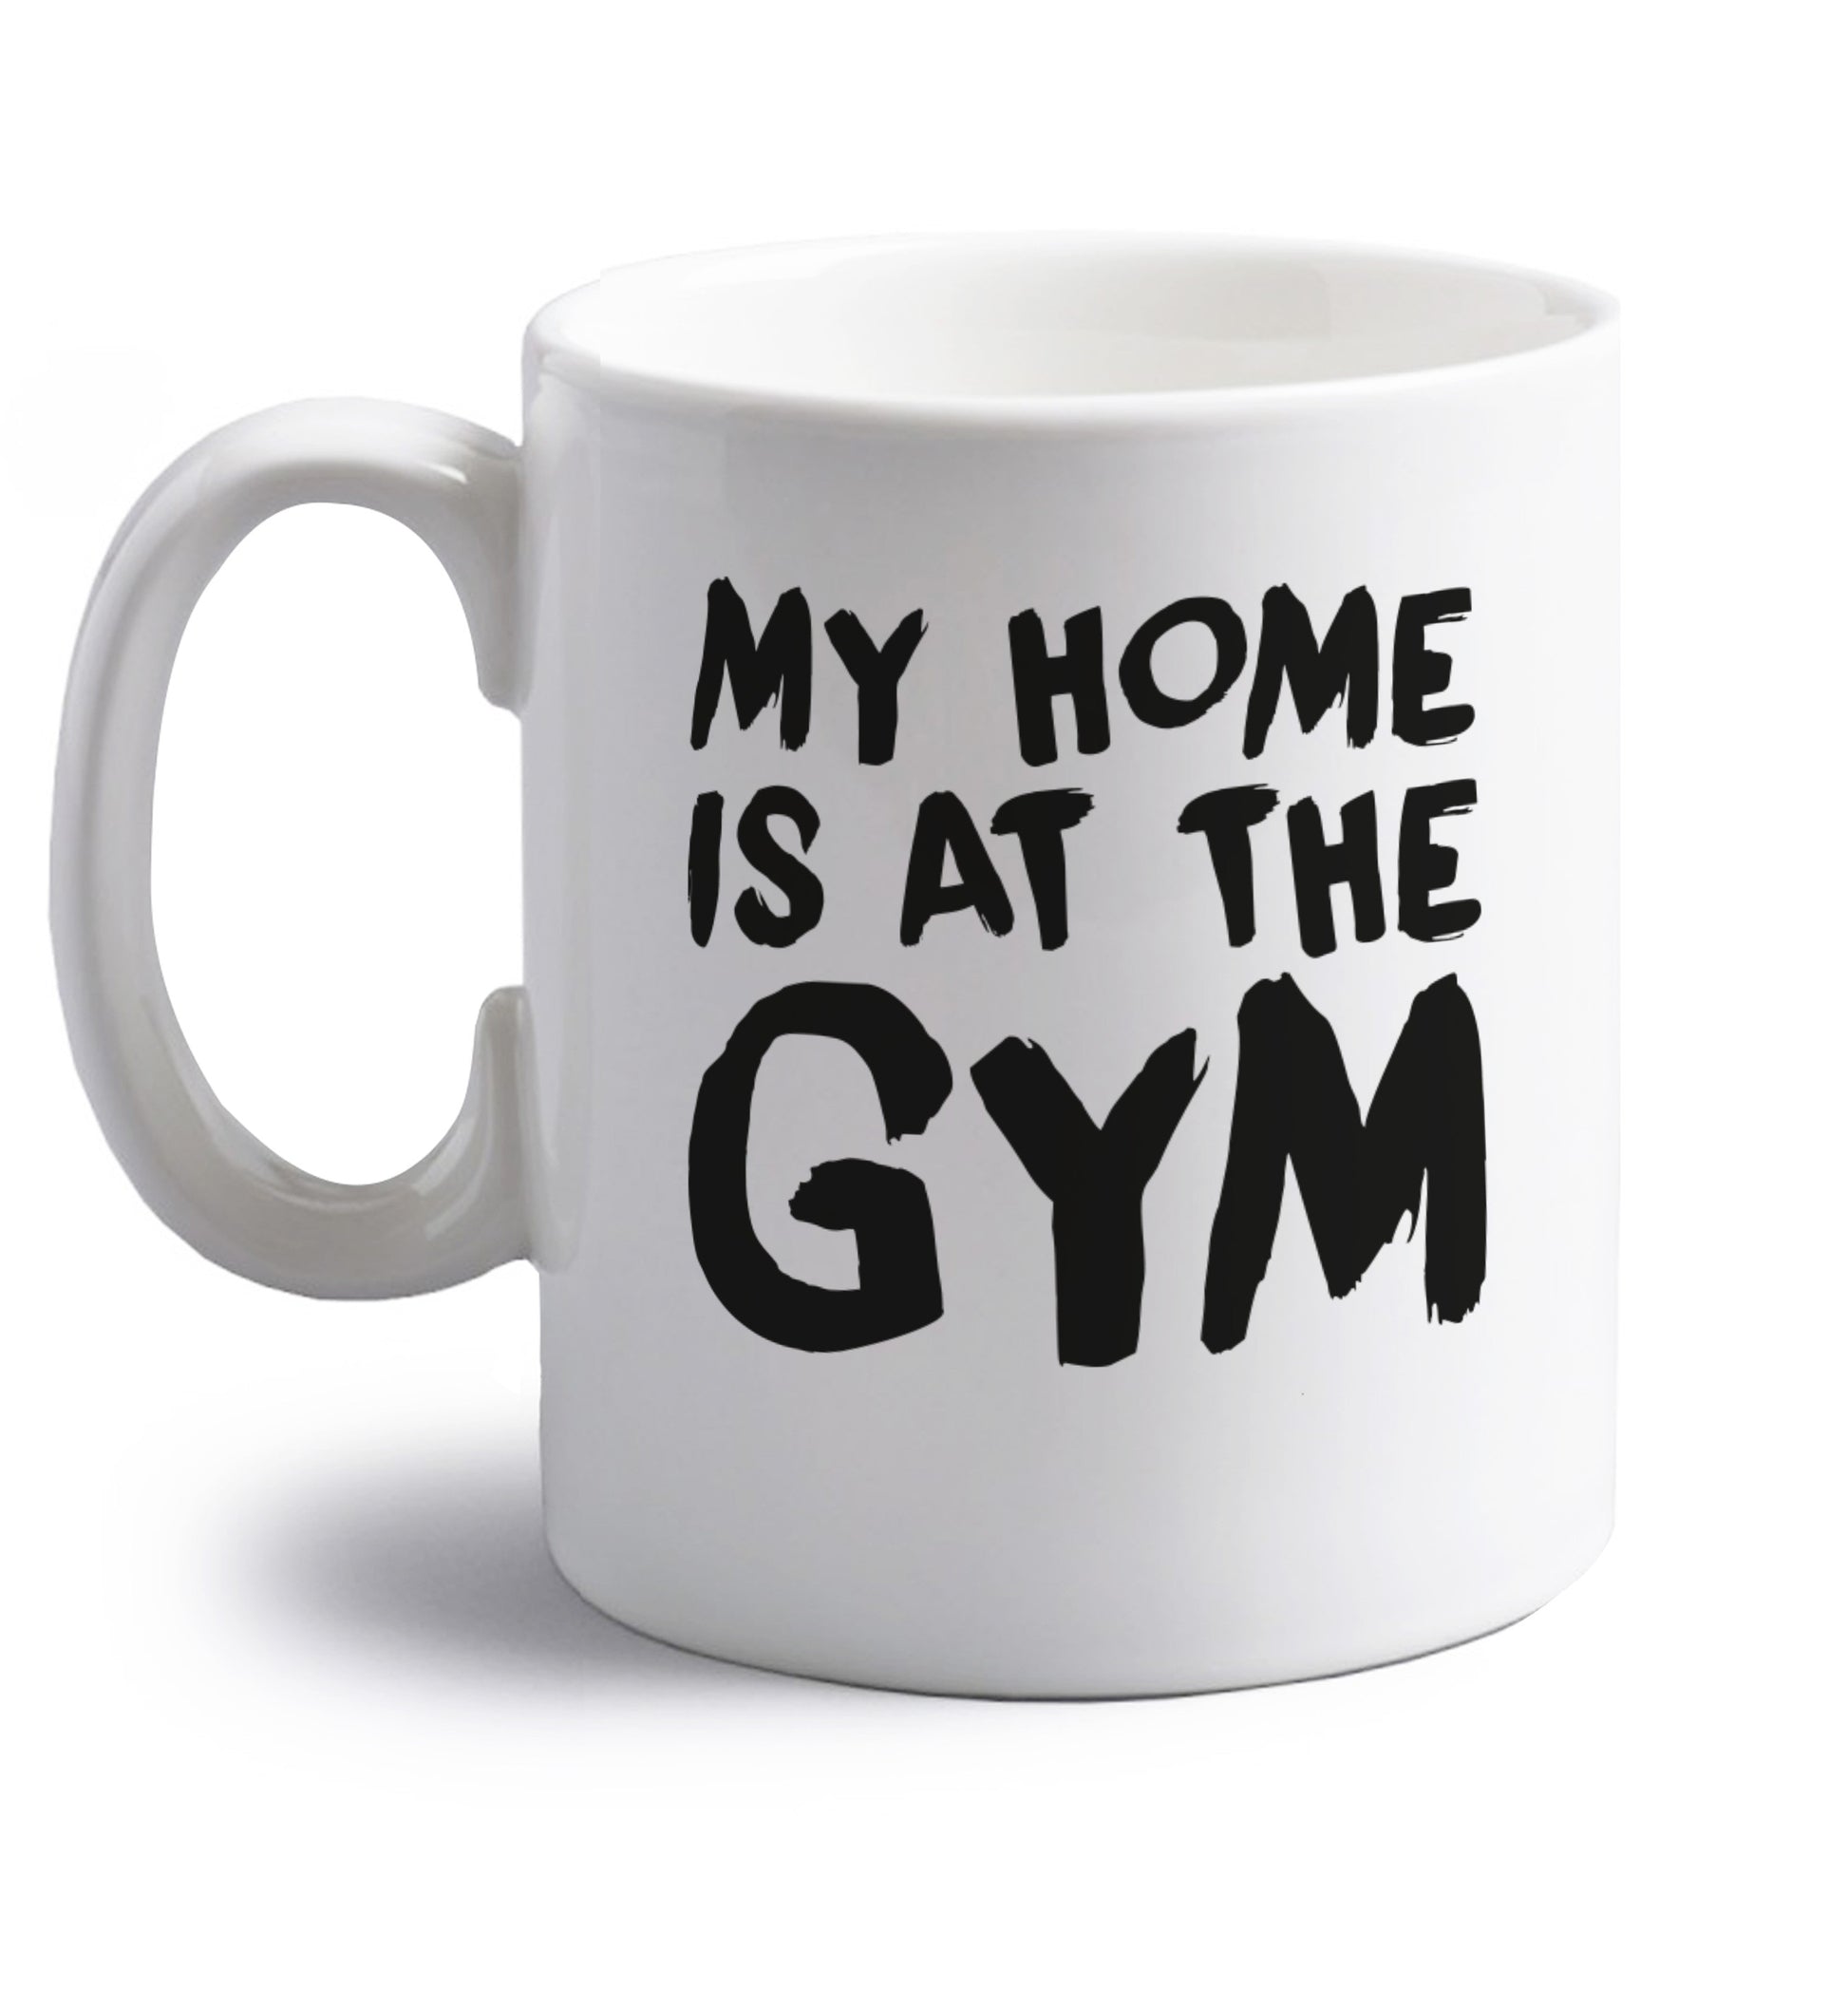 My home is at the gym right handed white ceramic mug 